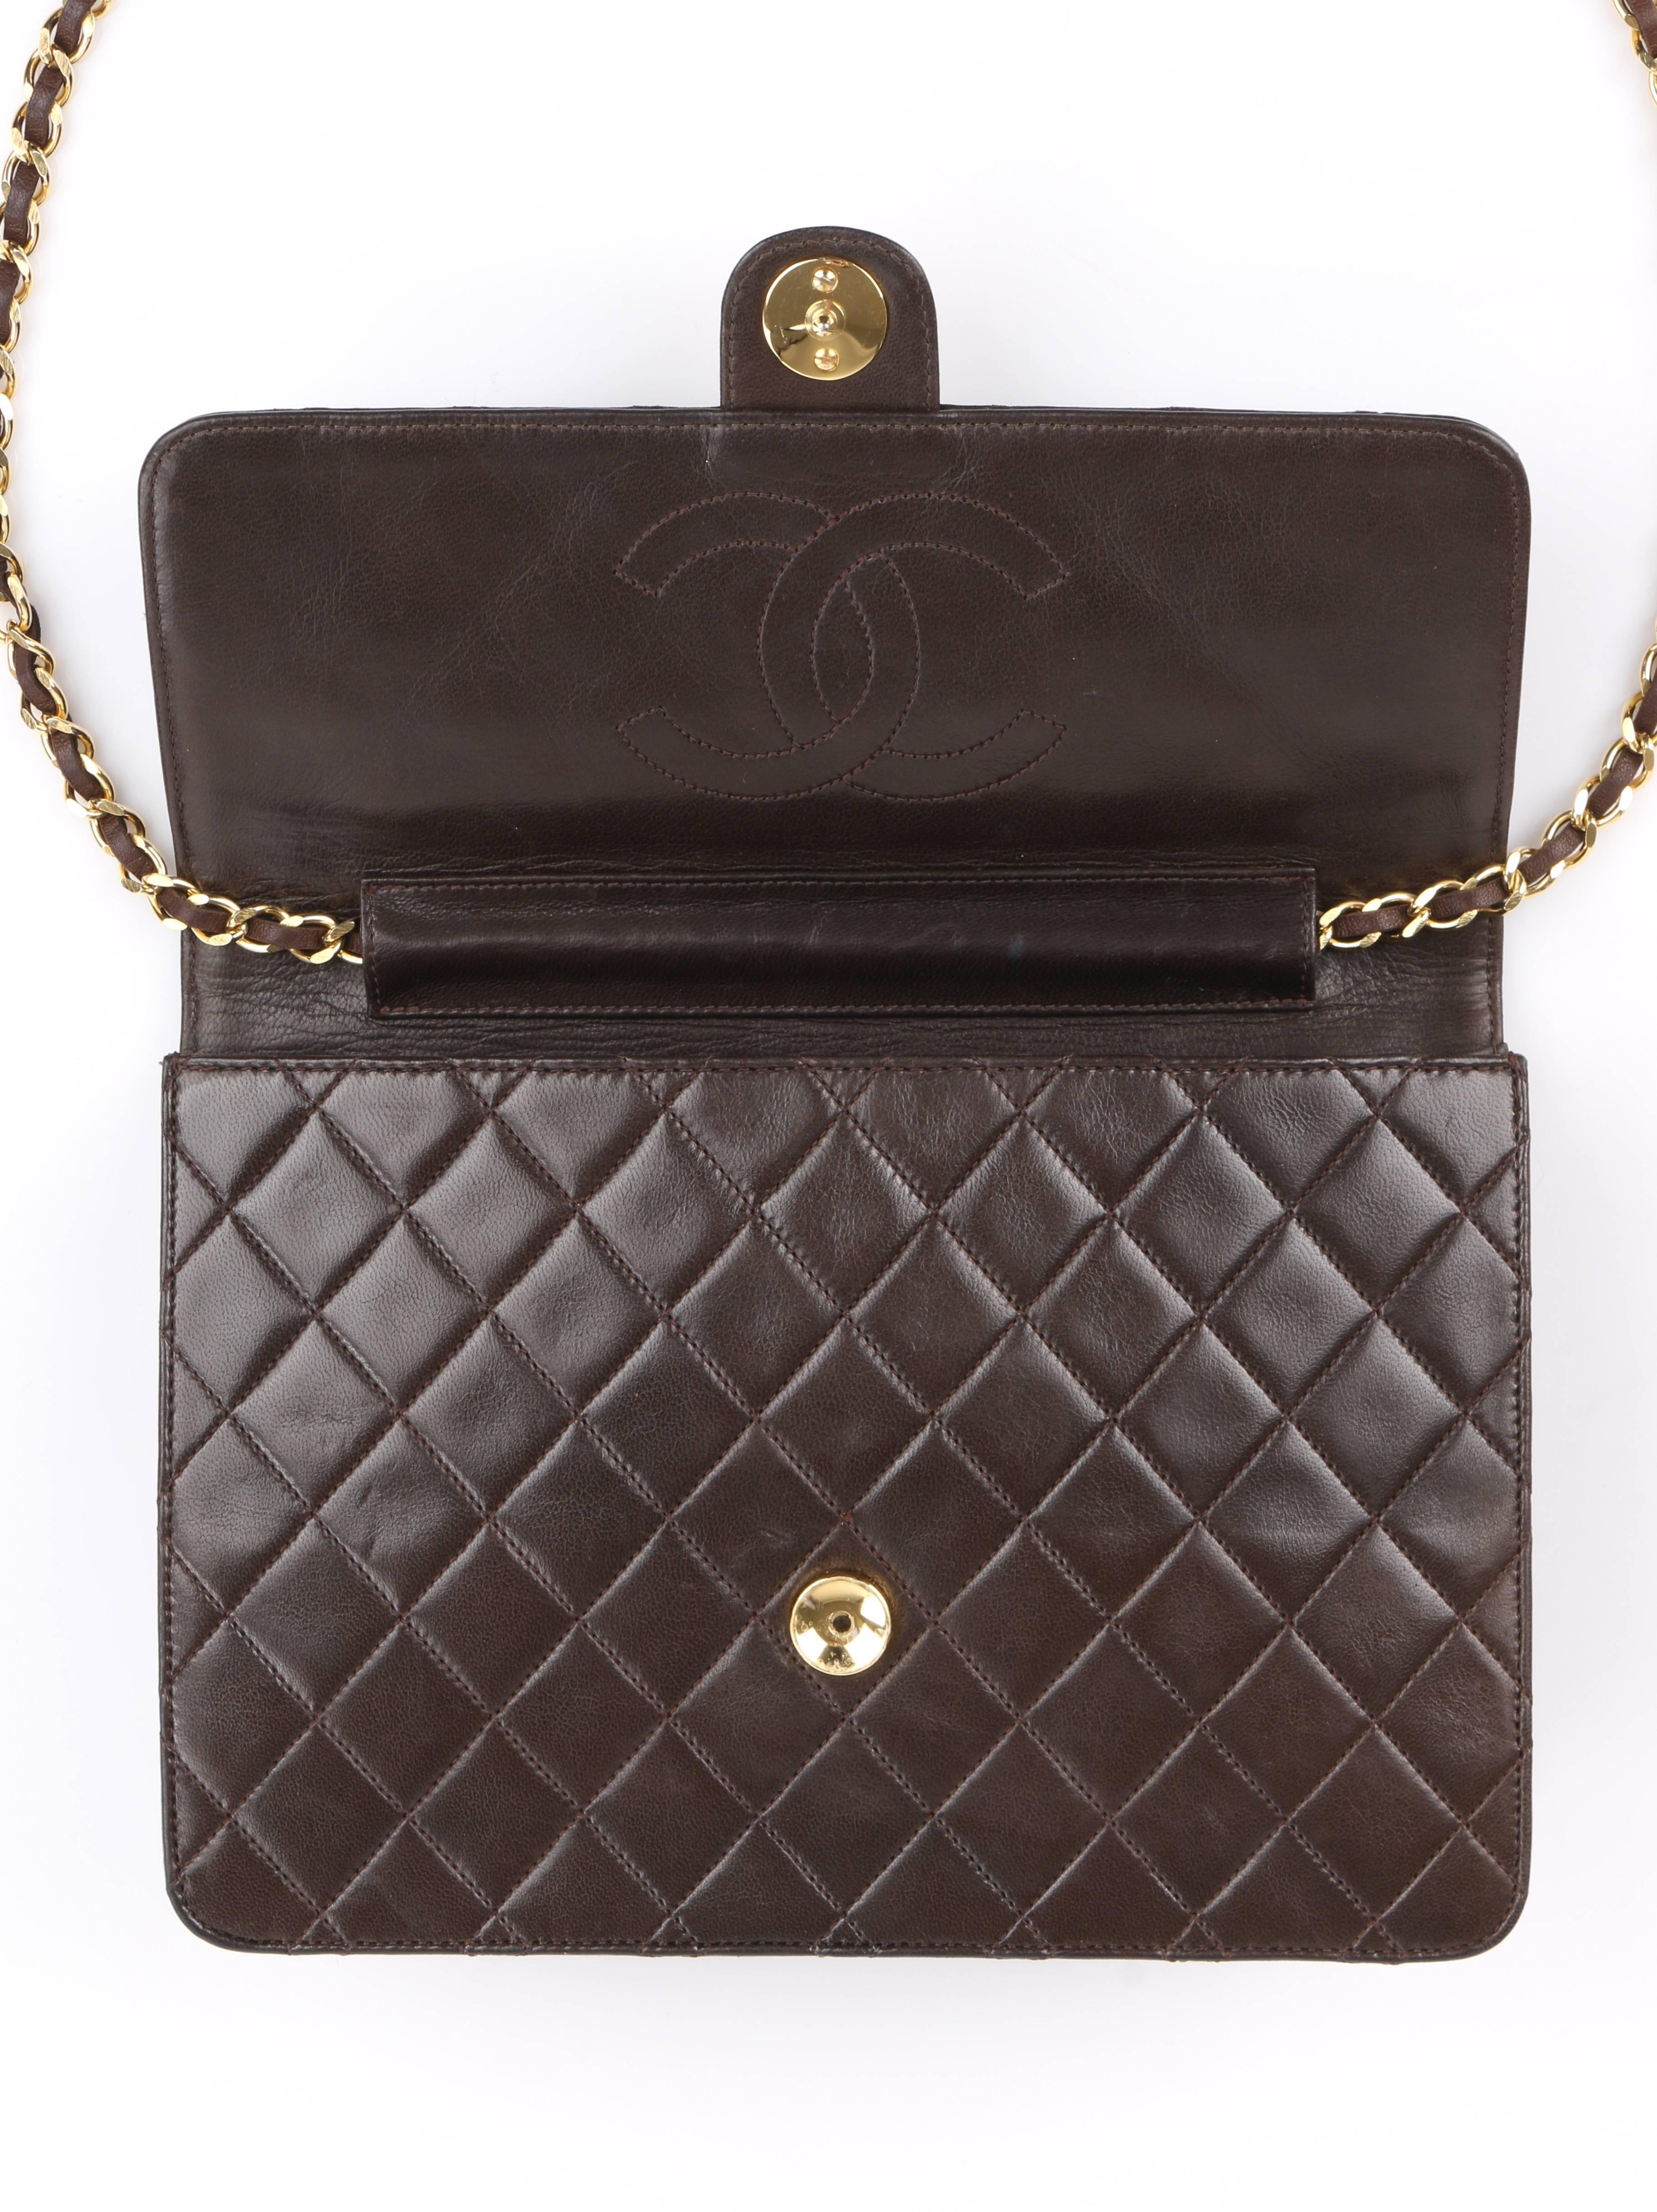 Black CHANEL c.1990's Brown Diamond Quilted Lambskin Leather Classic Flap Bag